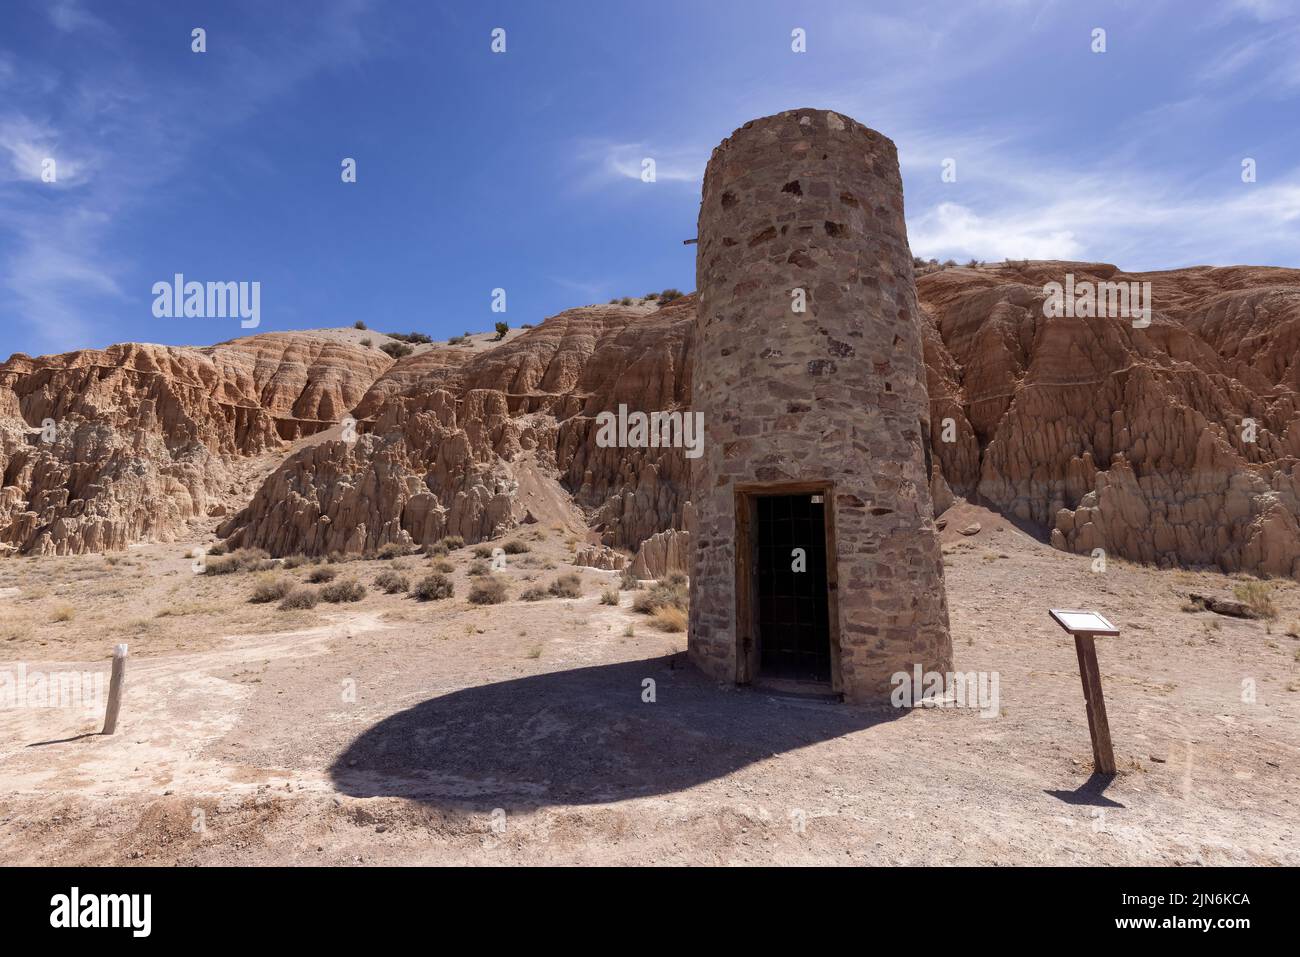 Civilian Conservation Corps Water Tower and Rock Formation in the desert Stock Photo